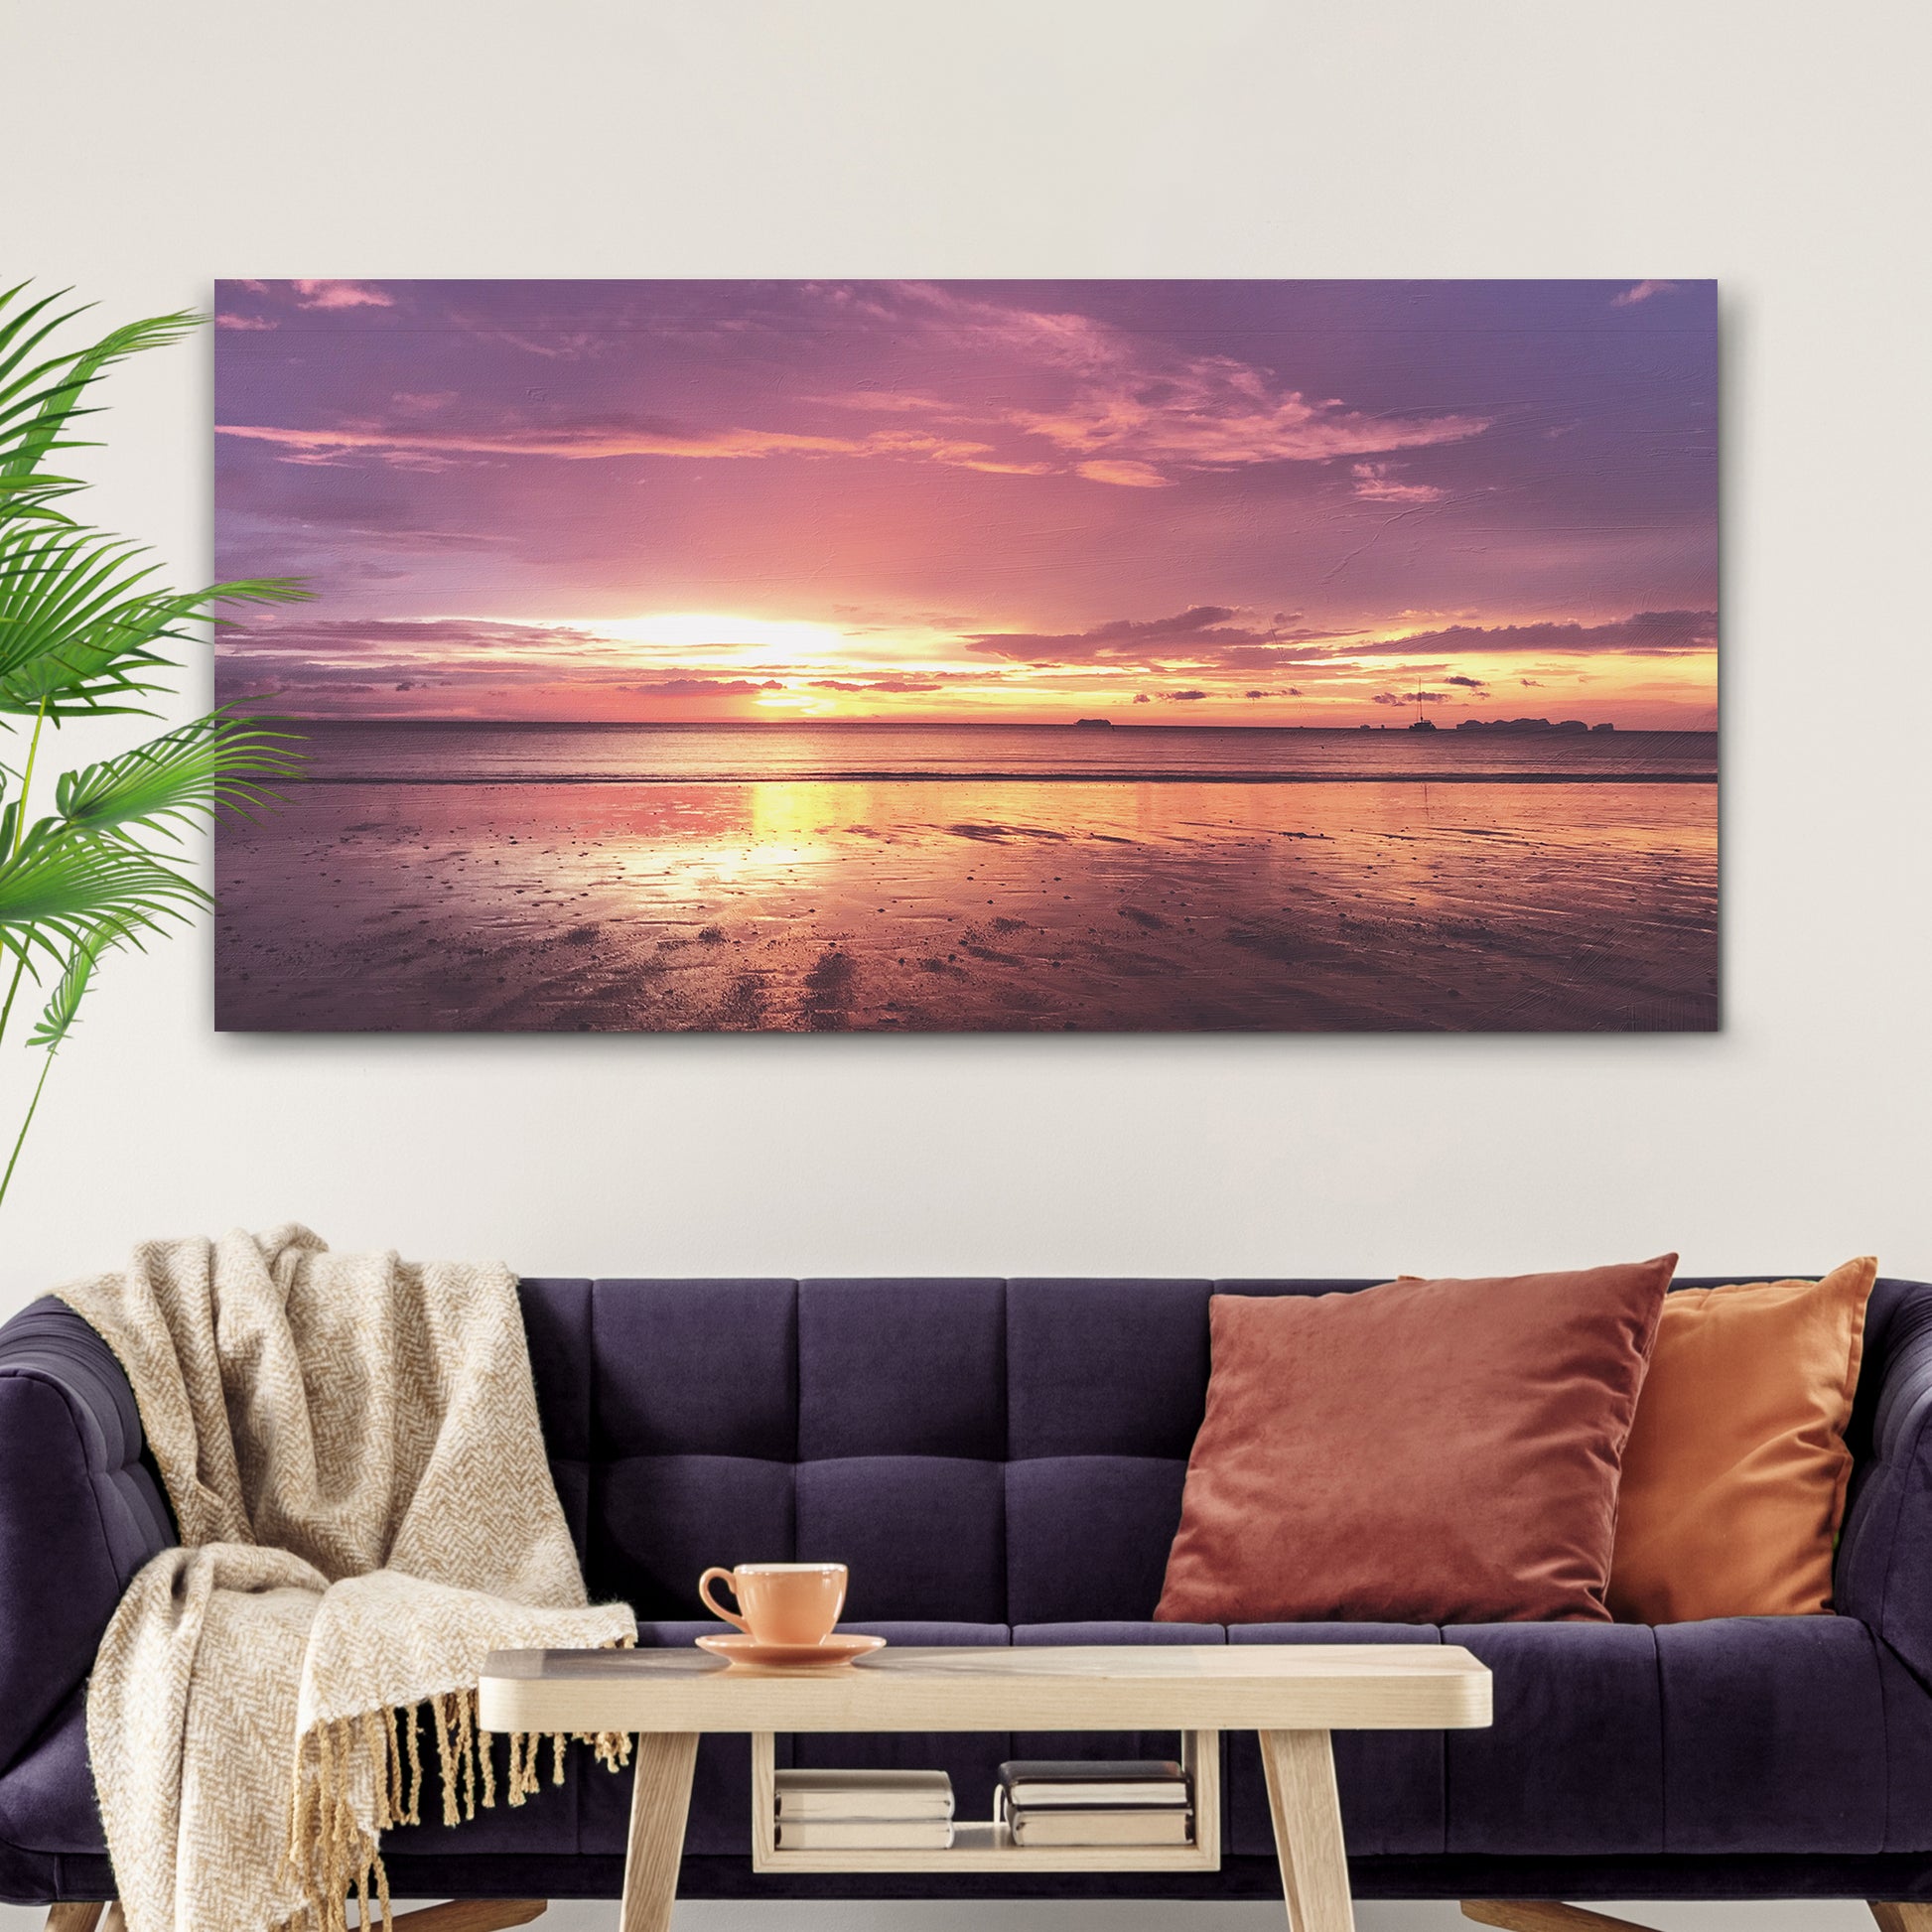 Sunset By The Beach Canvas Wall Art Style 2 - Image by Tailored Canvases